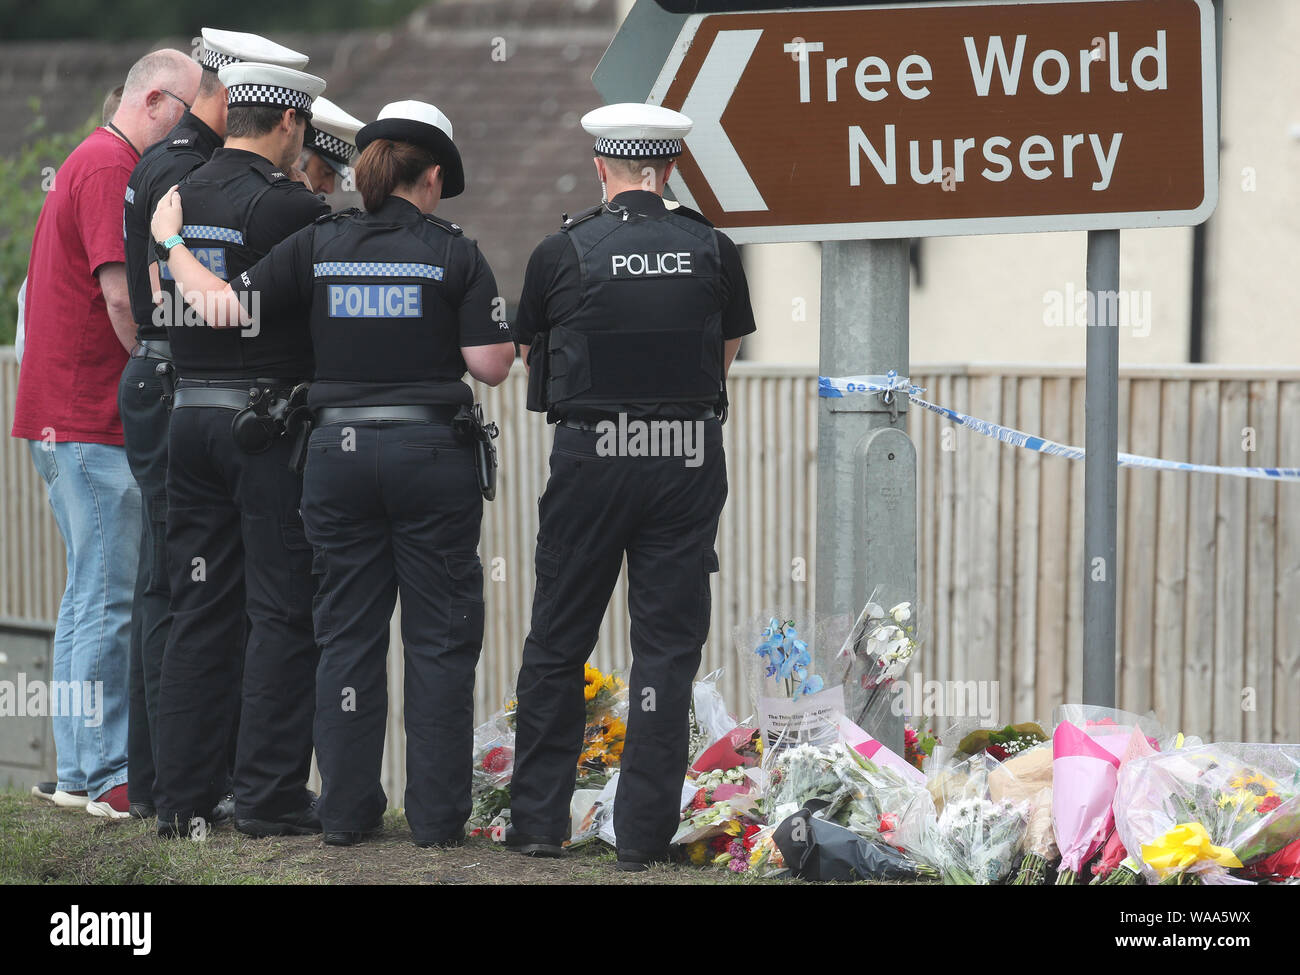 Police officers pay their respects in front of tributes left near Ufton Lane, Sulhamstead, Berkshire, where Thames Valley Police officer Pc Andrew Harper, 28, died following a 'serious incident' at about 11.30pm on Thursday near the A4 Bath Road, between Reading and Newbury, at the village of Sulhamstead in Berkshire. Stock Photo